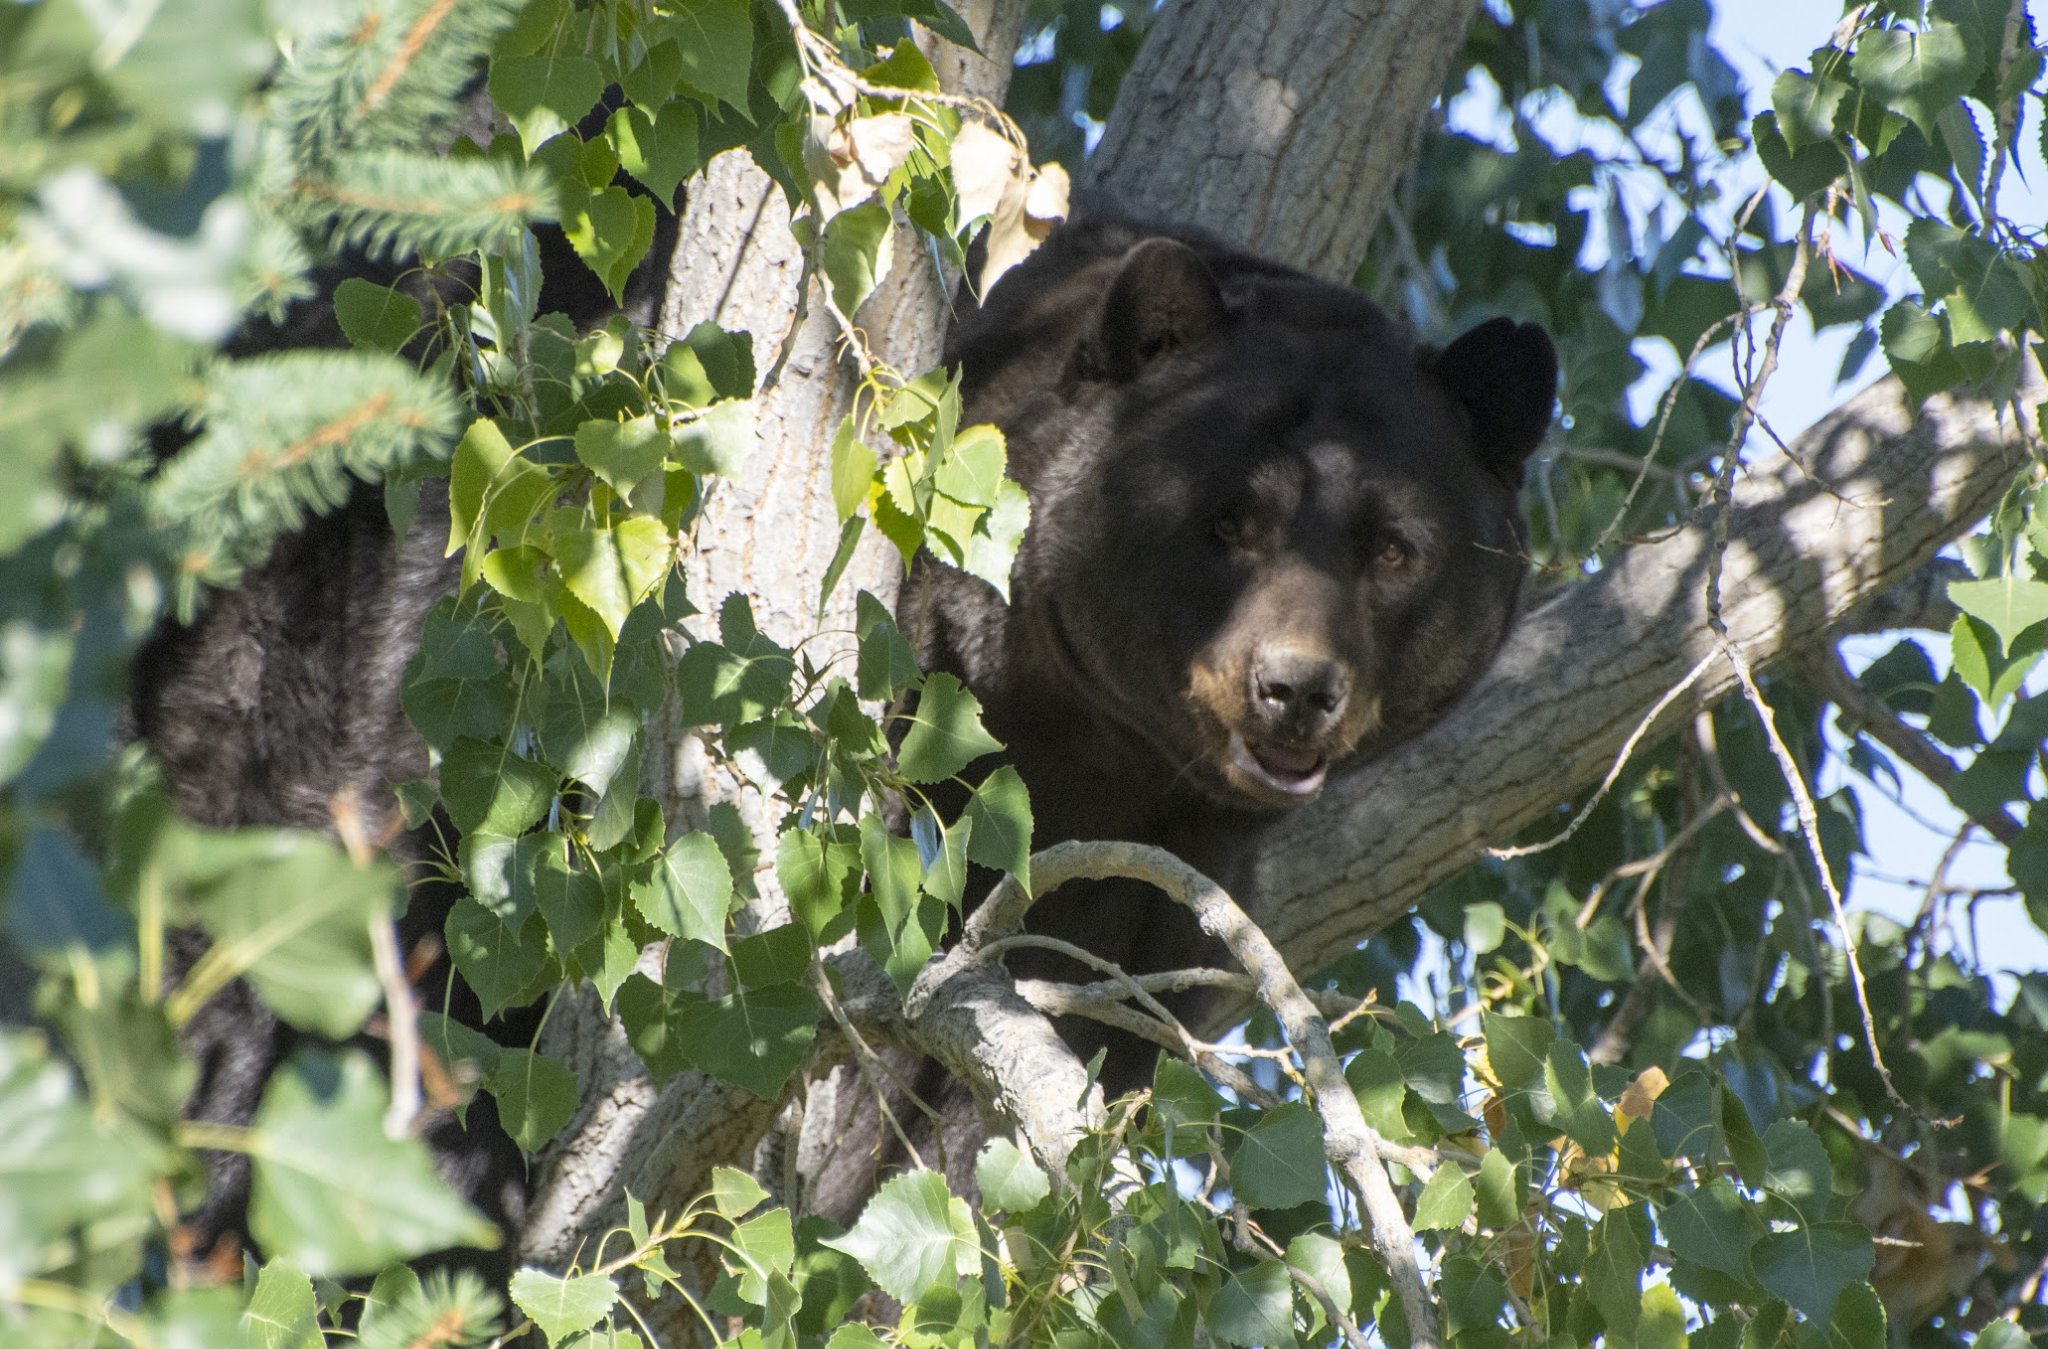 Colorado Woman Attacked by a Black Bear in Her Backyard